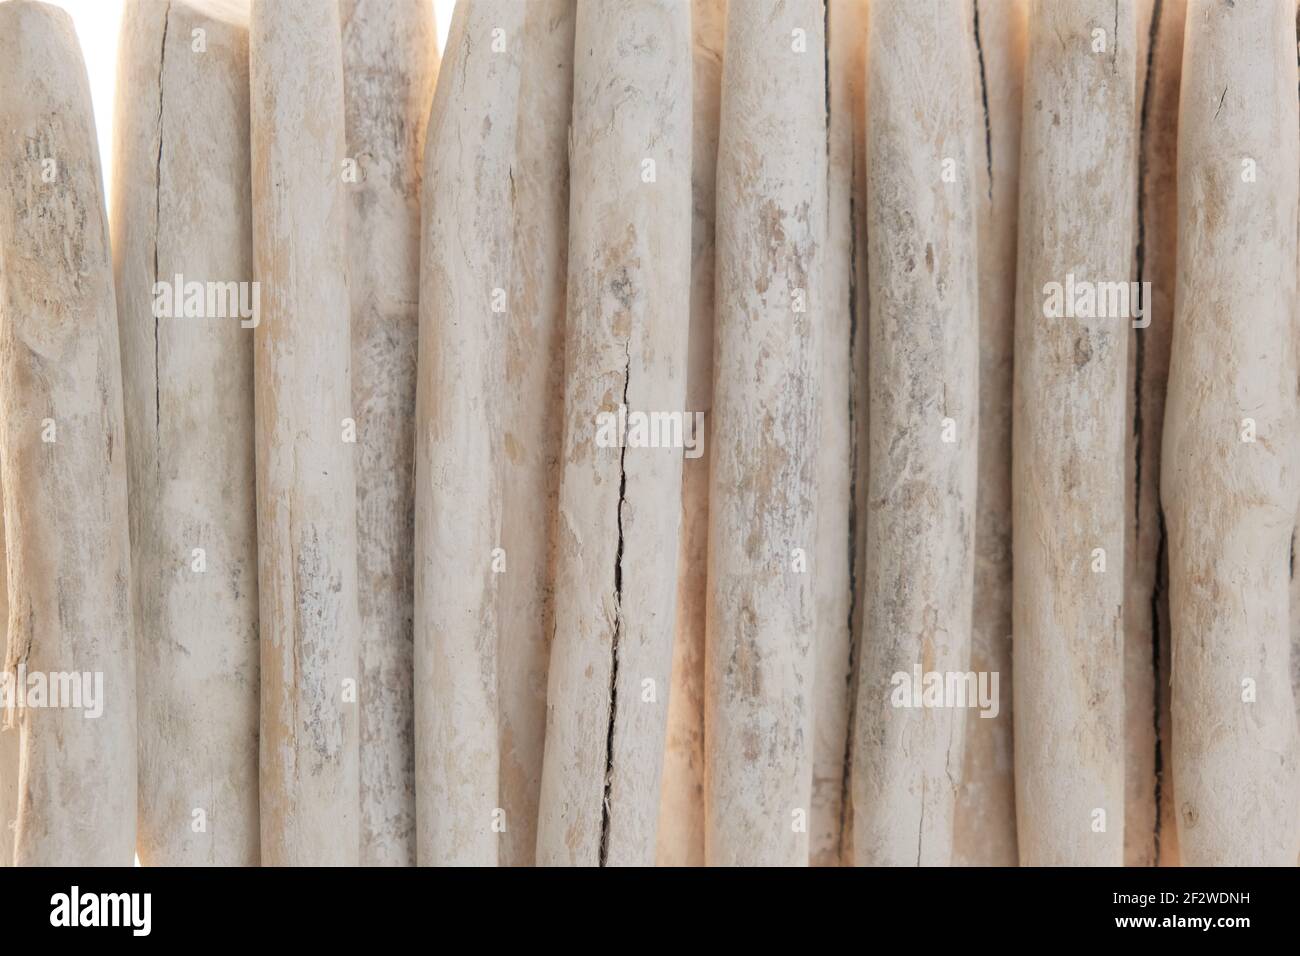 Driftwood. row of white sea snags.White sea driftwood close-up texture.Wooden nature background. Stock Photo